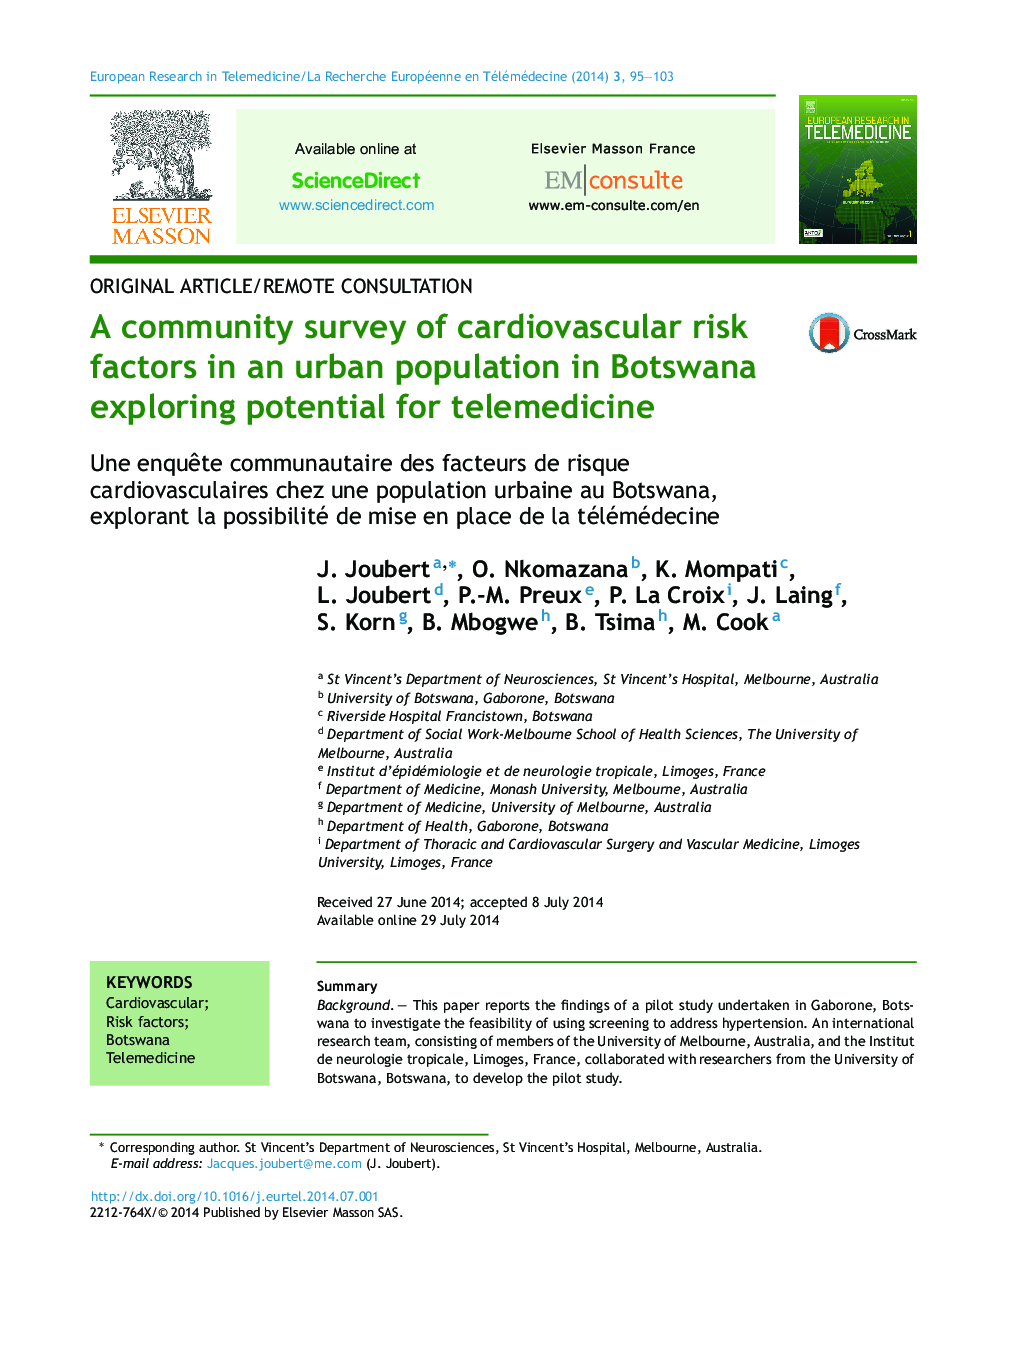 A community survey of cardiovascular risk factors in an urban population in Botswana exploring potential for telemedicine